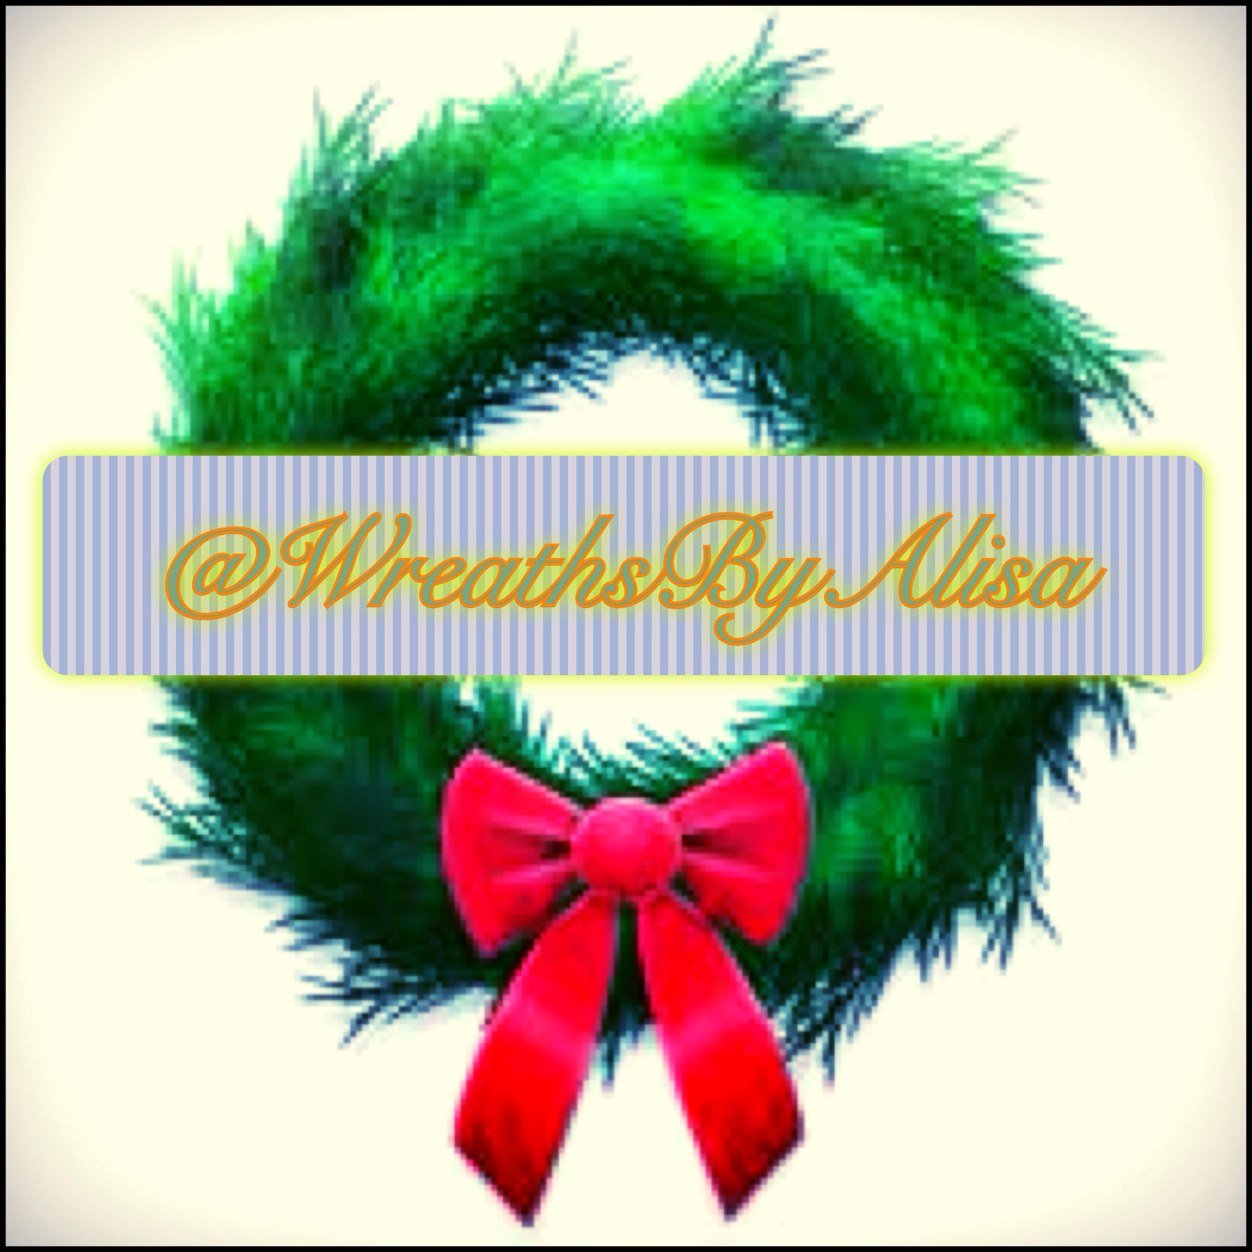 Persinalized wreaths for all !!! Favorite team divided house. Birthday, holiday & every thing invetween. Wreathsbyalisa@gmail.com